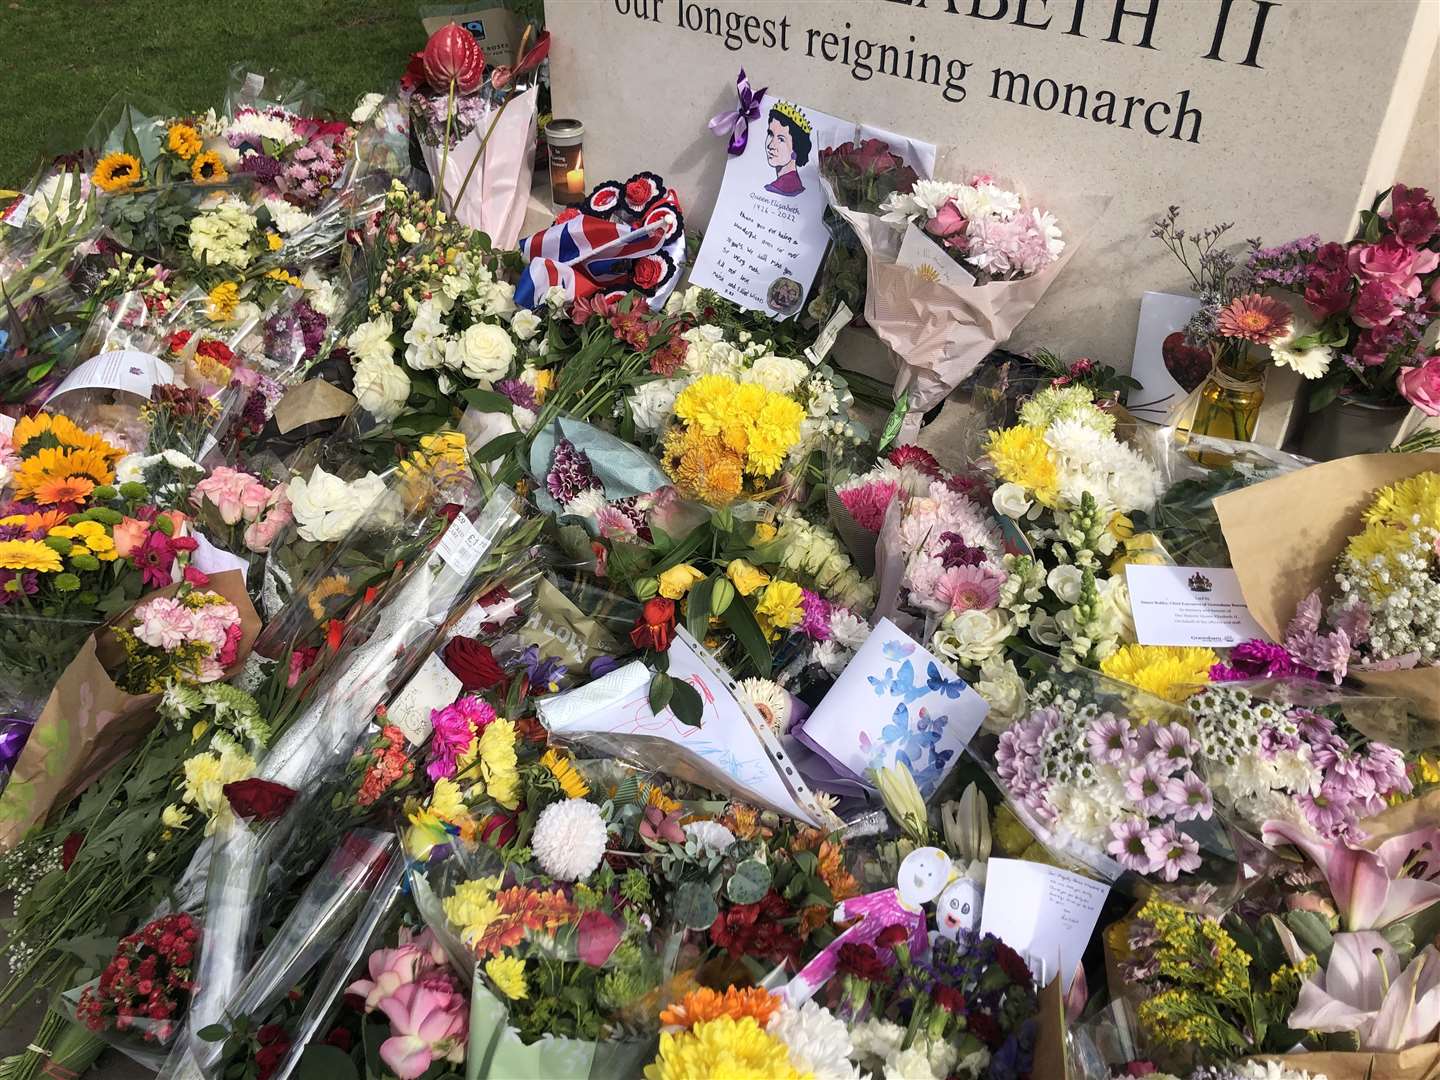 The floral tributes are growing daily